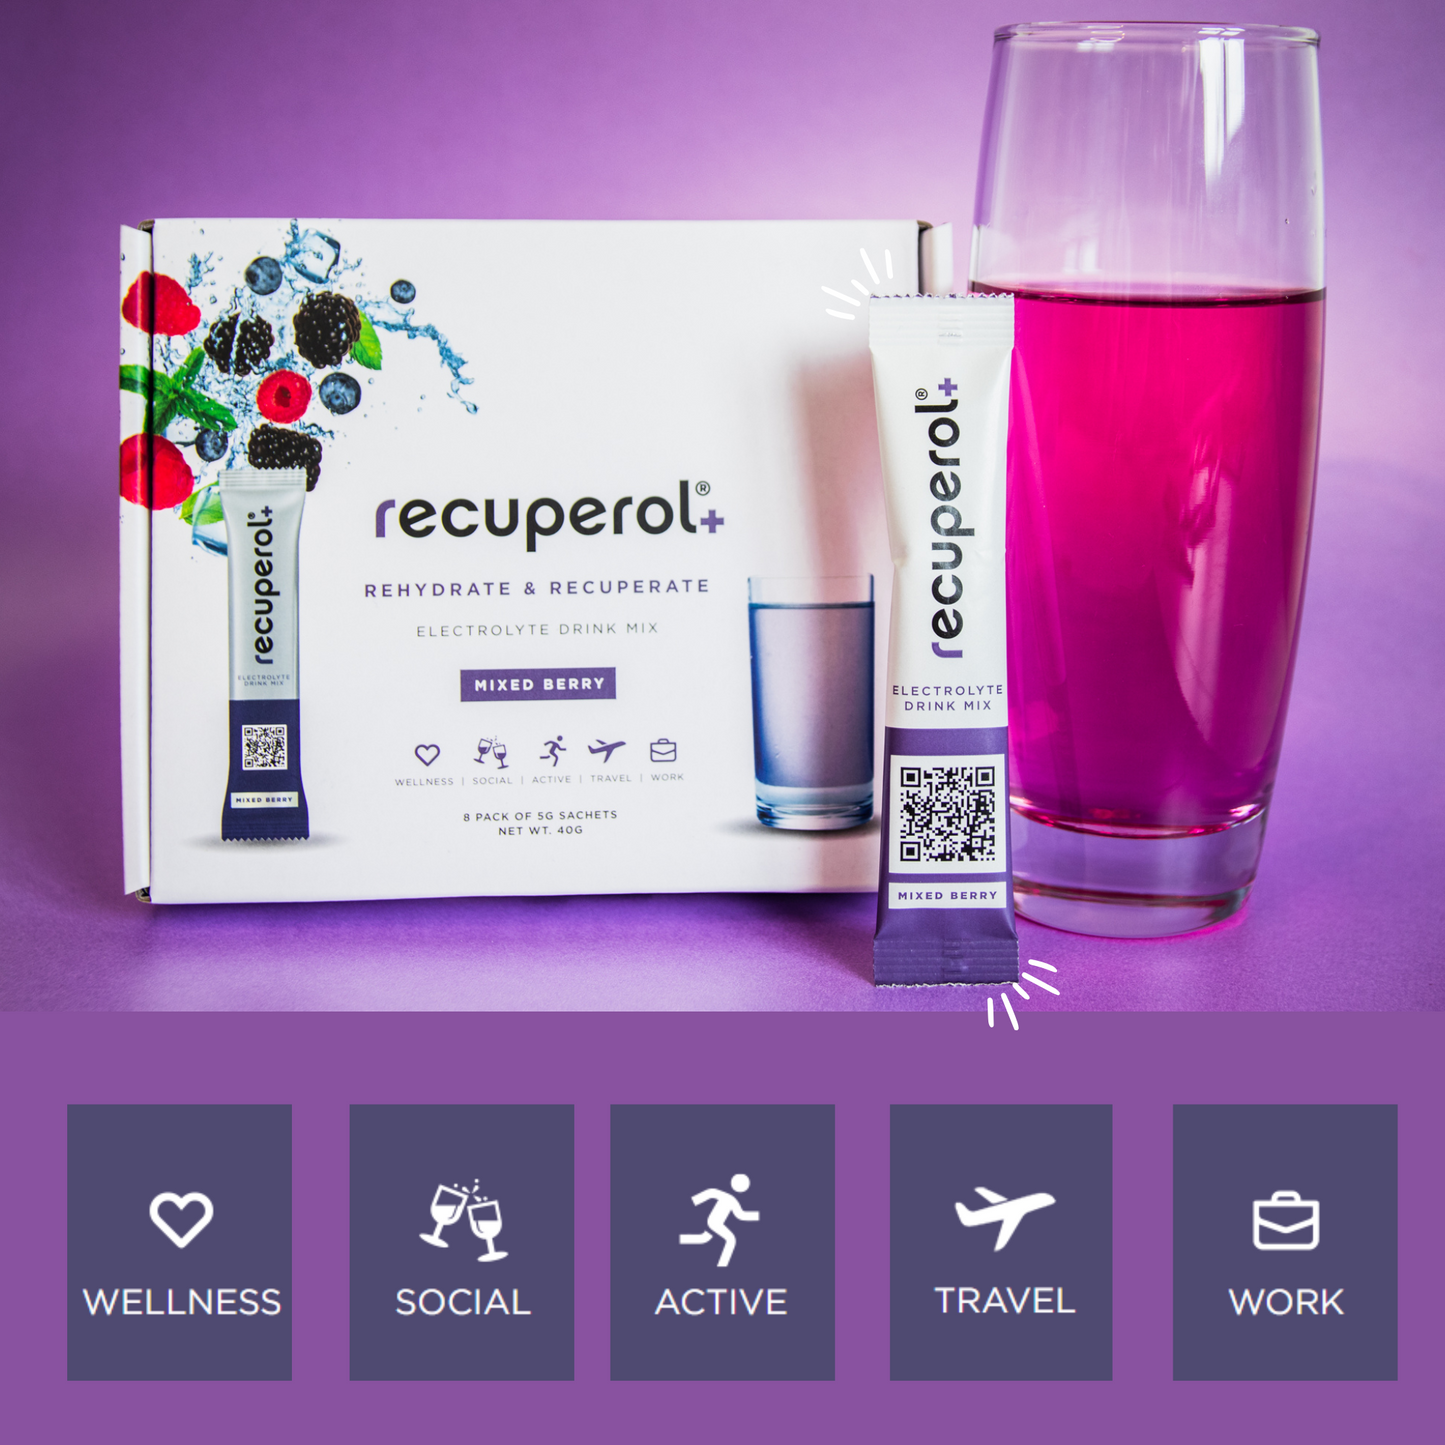 Recuperol Rehydration & Recovery Electrolyte Powder Drink Mix